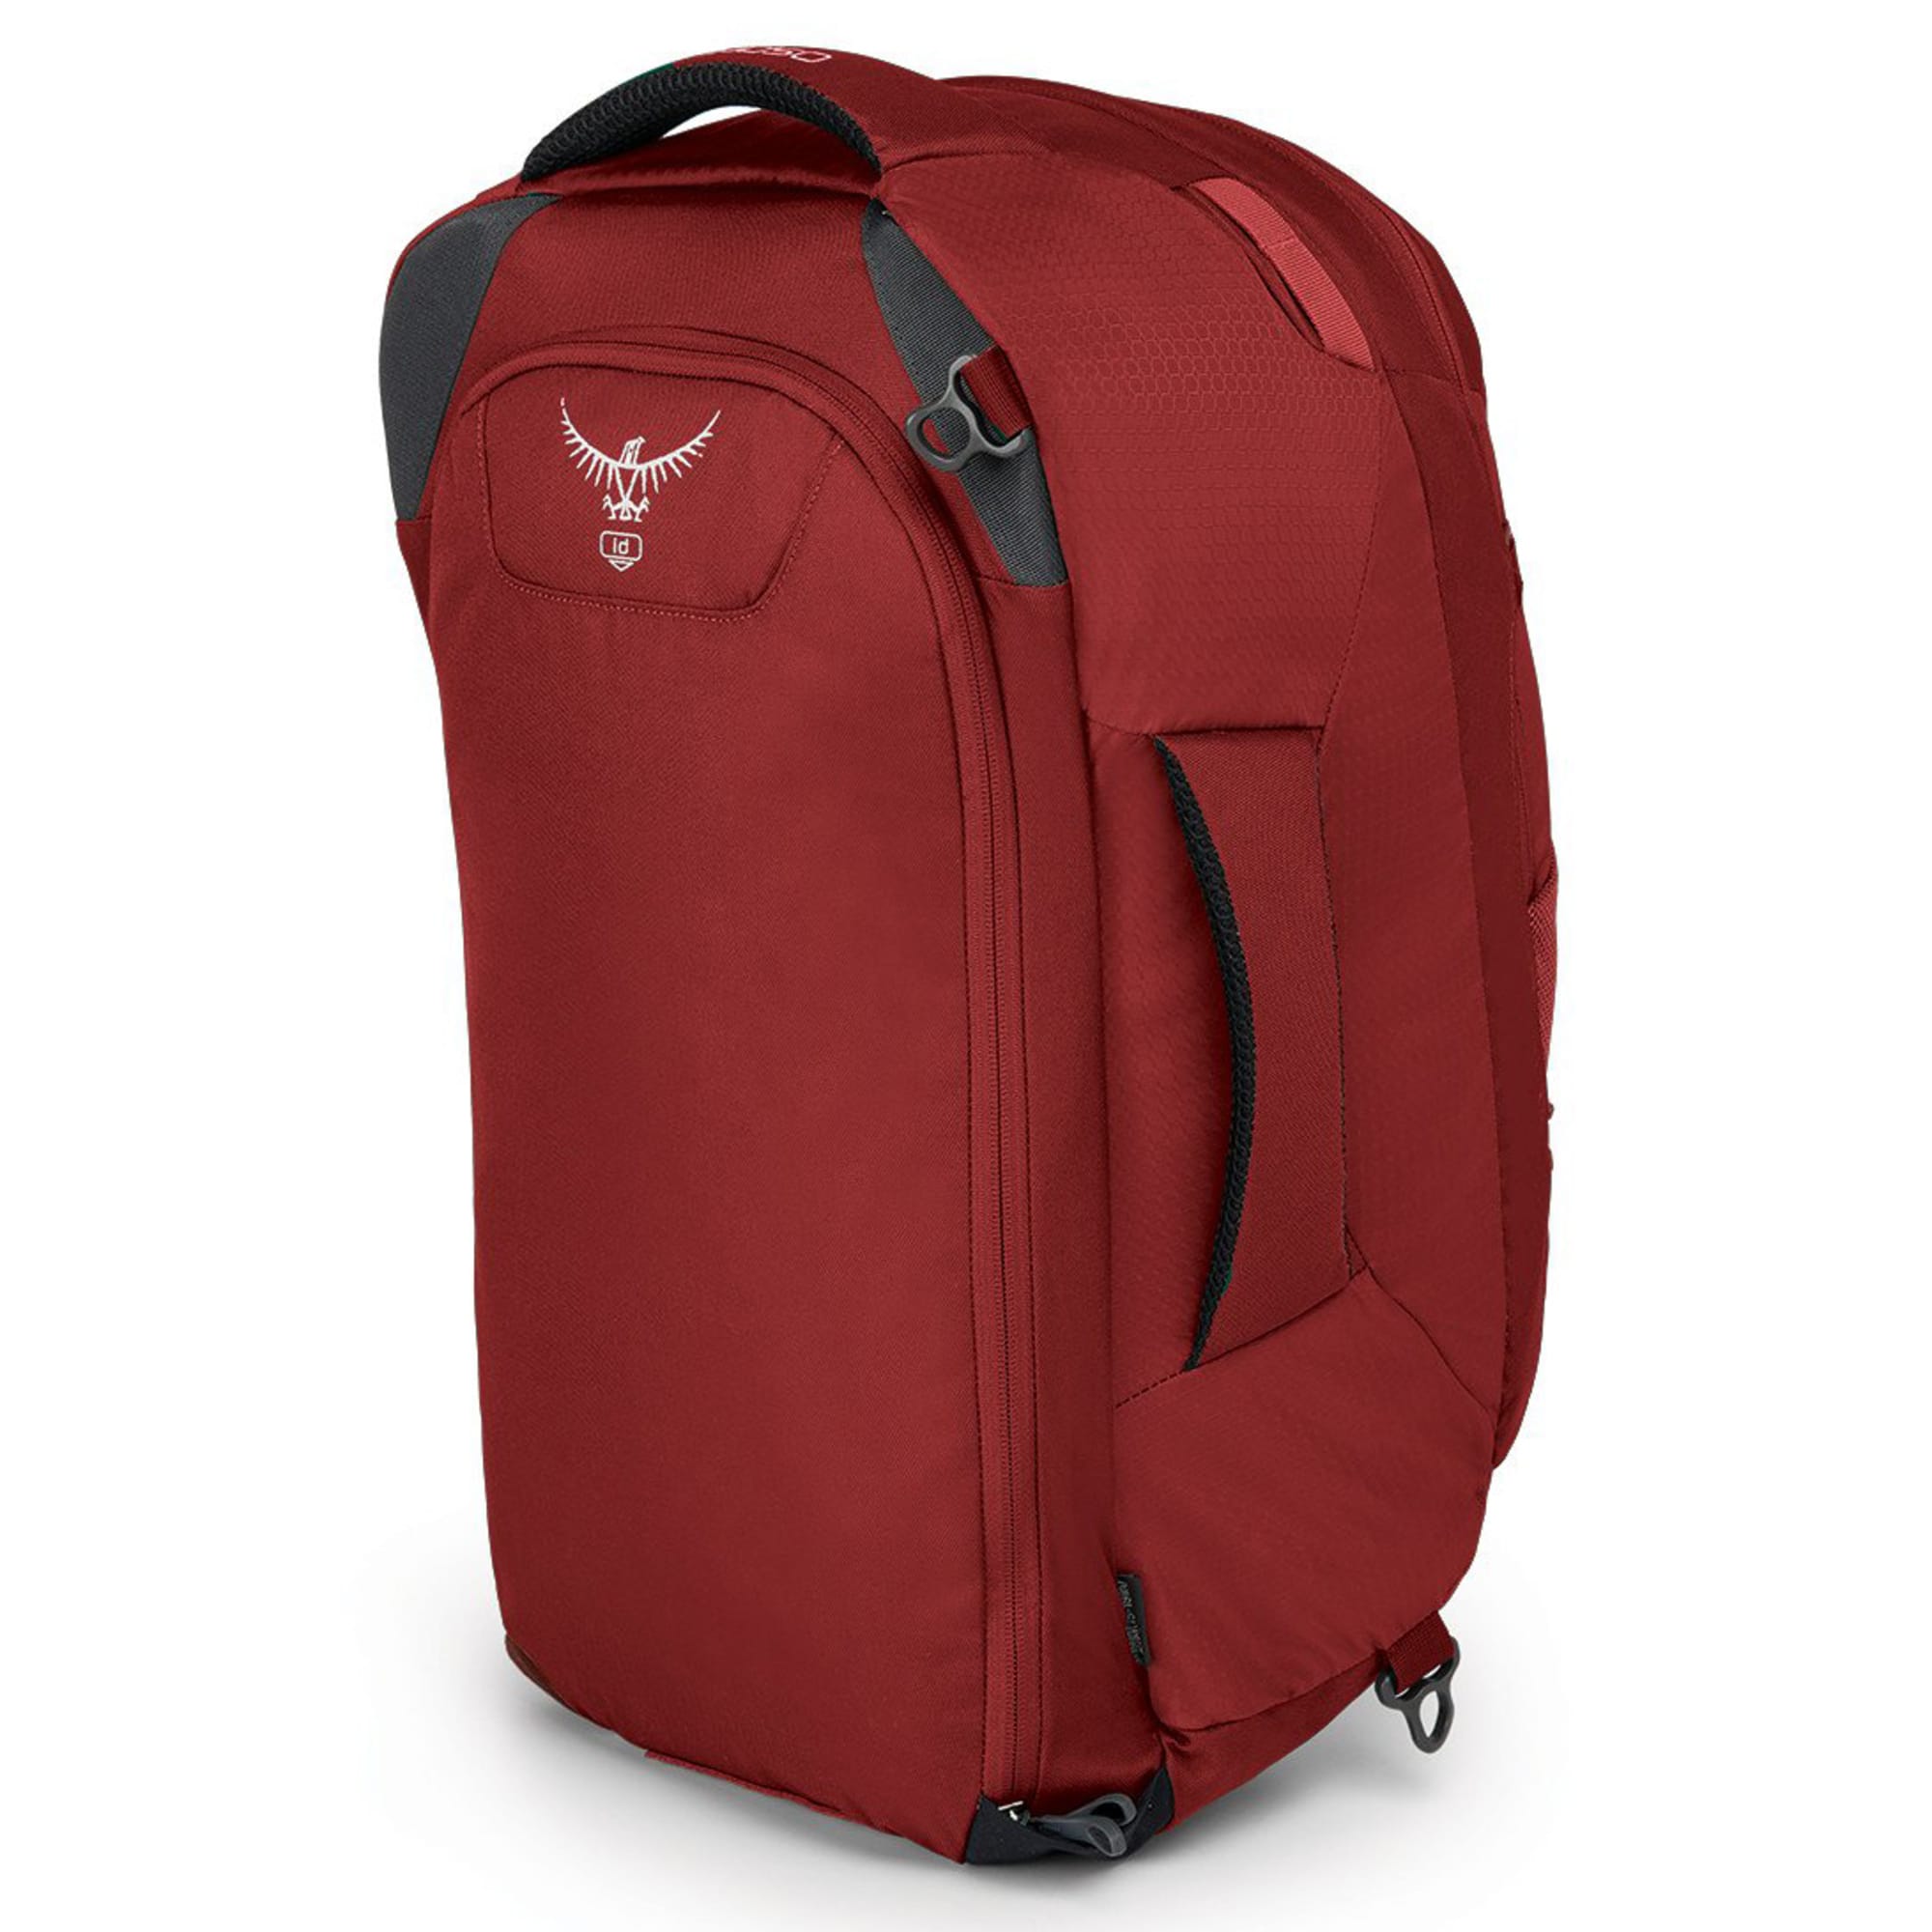 OSPREY Farpoint 40 Travel Pack - Eastern Mountain Sports